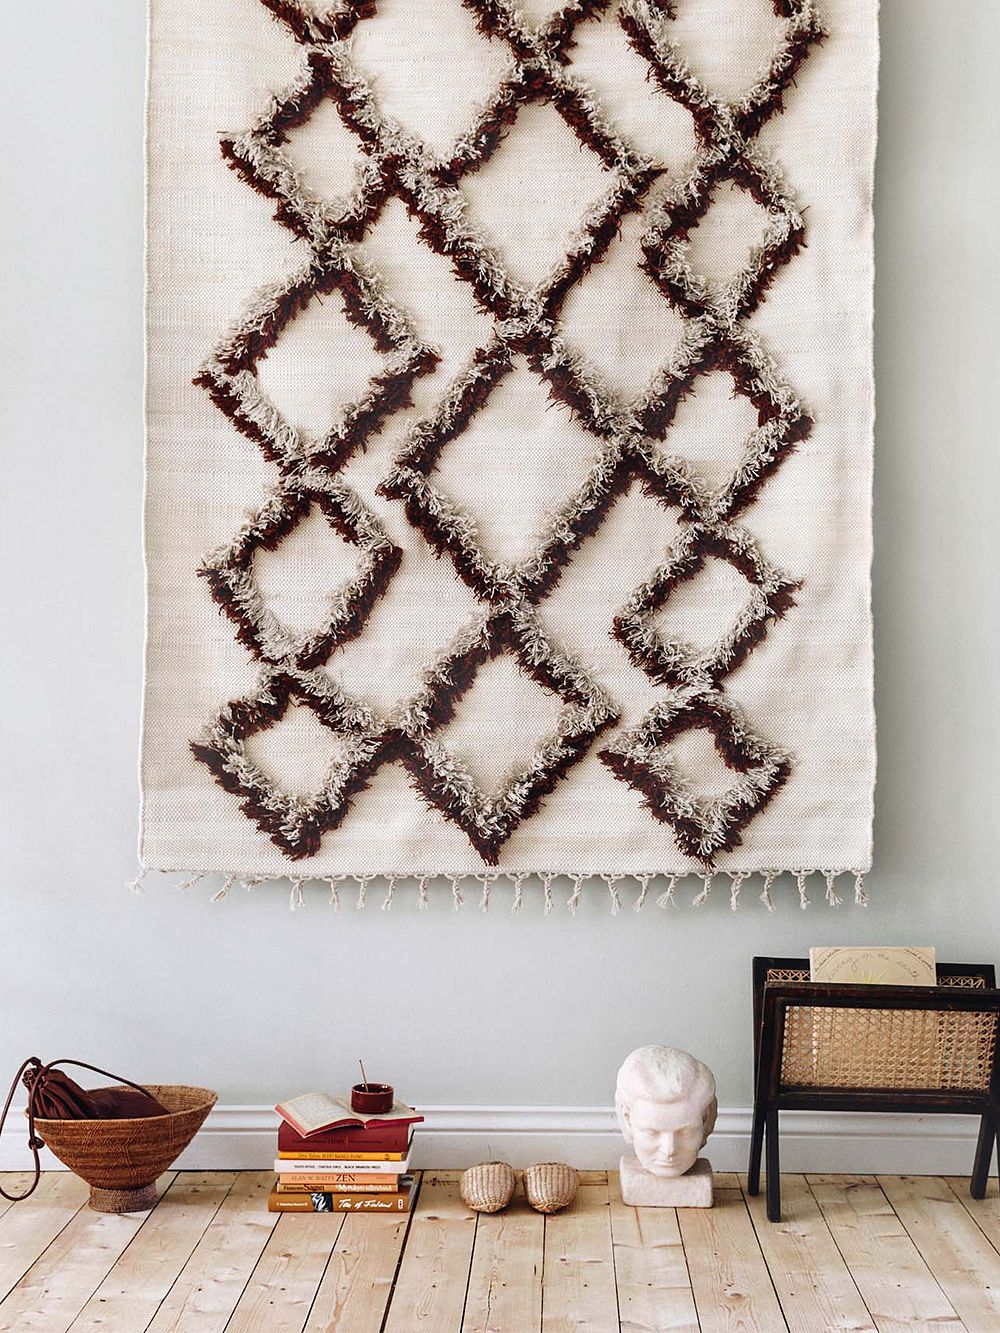 Finarte's Tie rug hung on the wall.